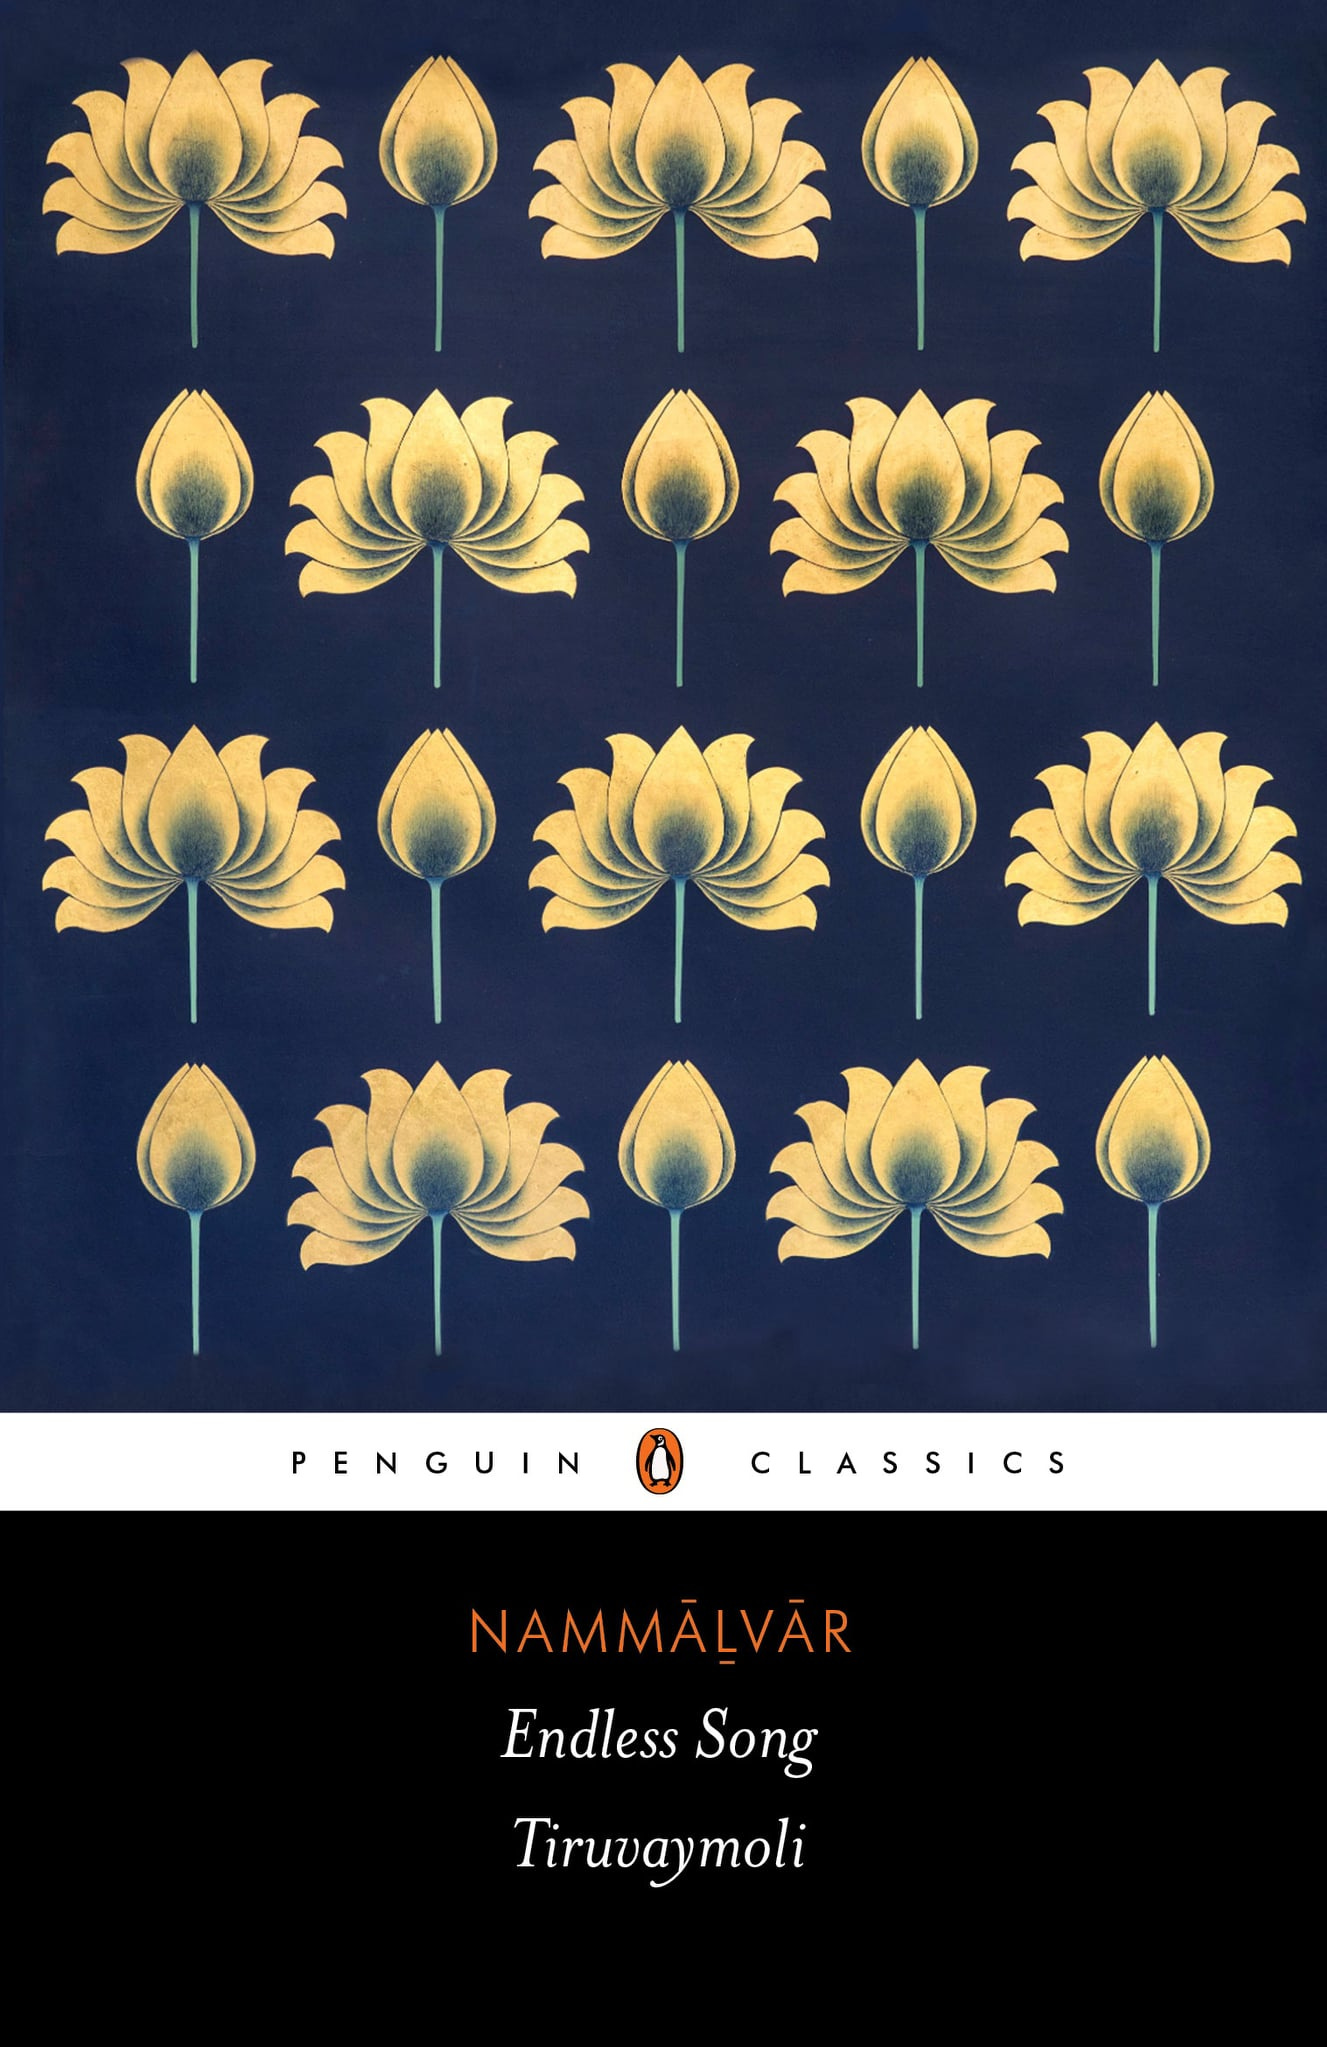 May be an image of flower and text that says "PENGUIN CLASSICS NAMMALVÃR Endless Song Tiruvaymoli"